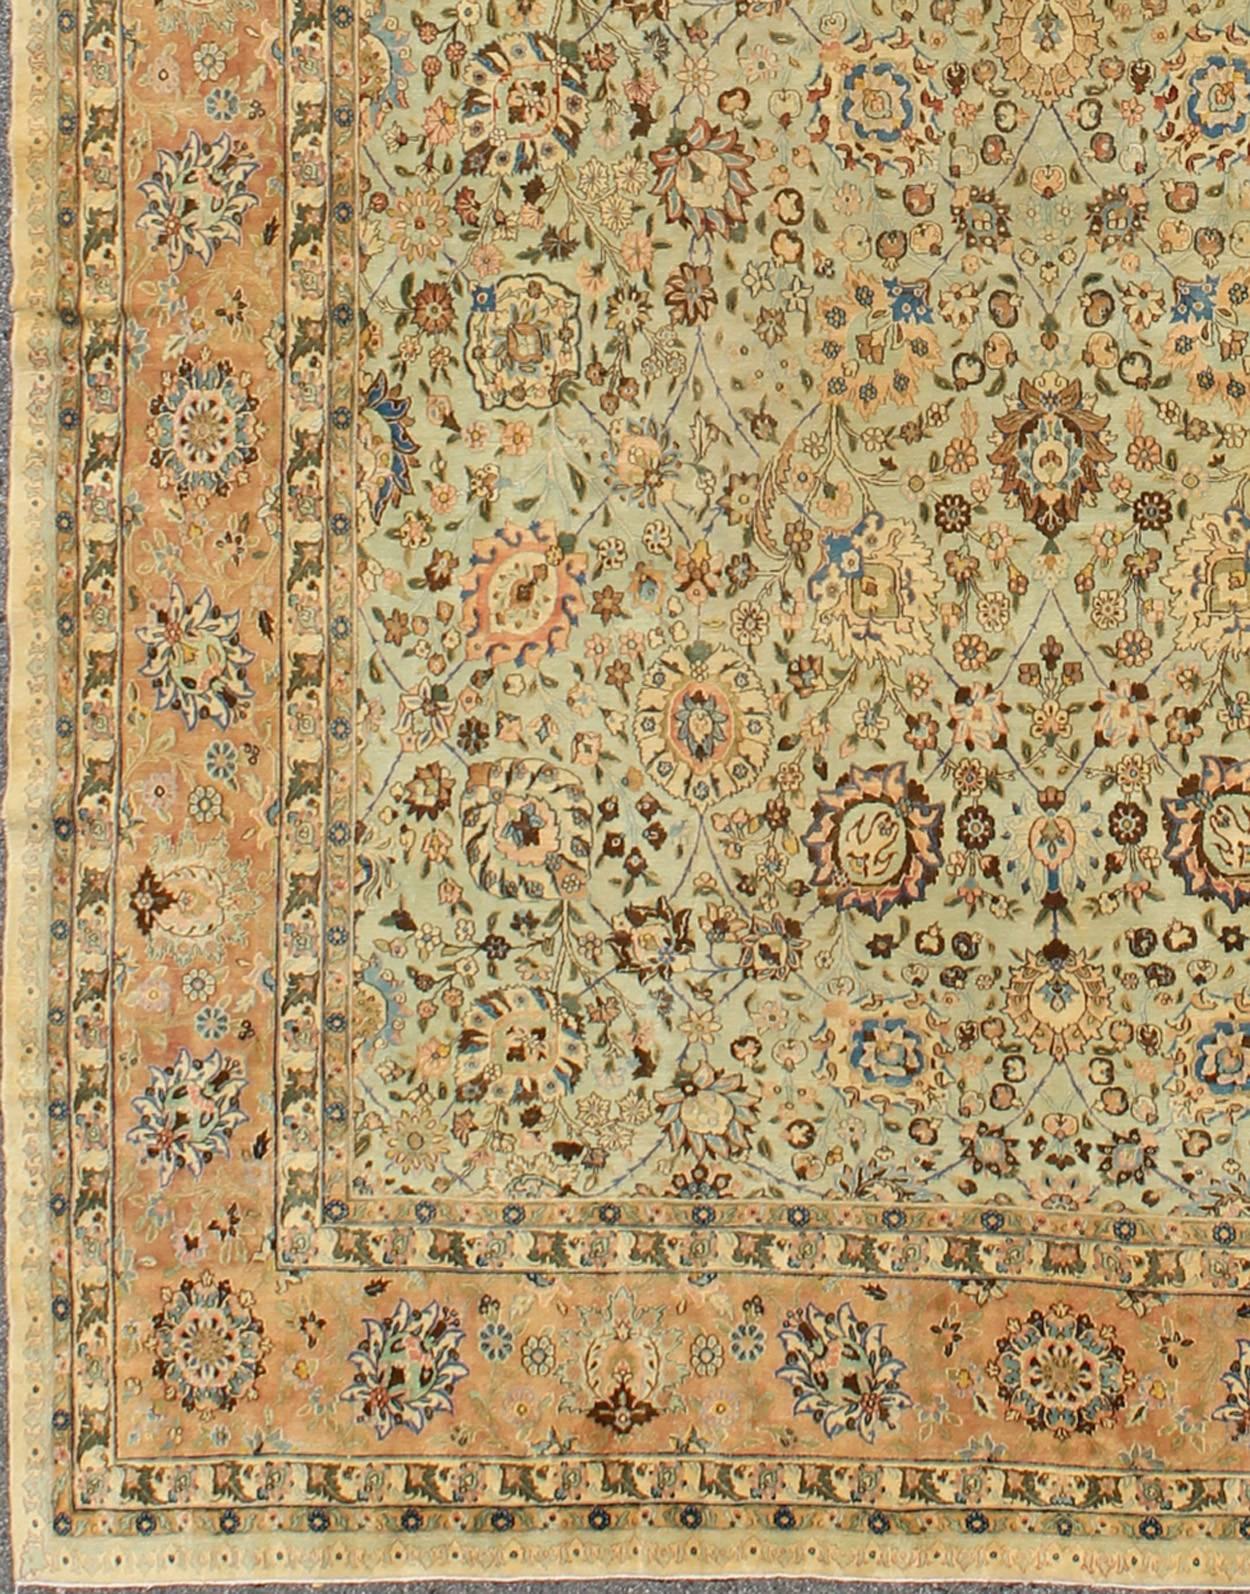 Antique Persian Tabriz Rug with Intricate Floral Design in Ivory and Salmon, rug bnc-100, country of origin / type: Iran / Tabriz, circa 1930

This vintage Persian Tabriz carpet (circa 1930) features a refined palate of ivory and salmon pink tones